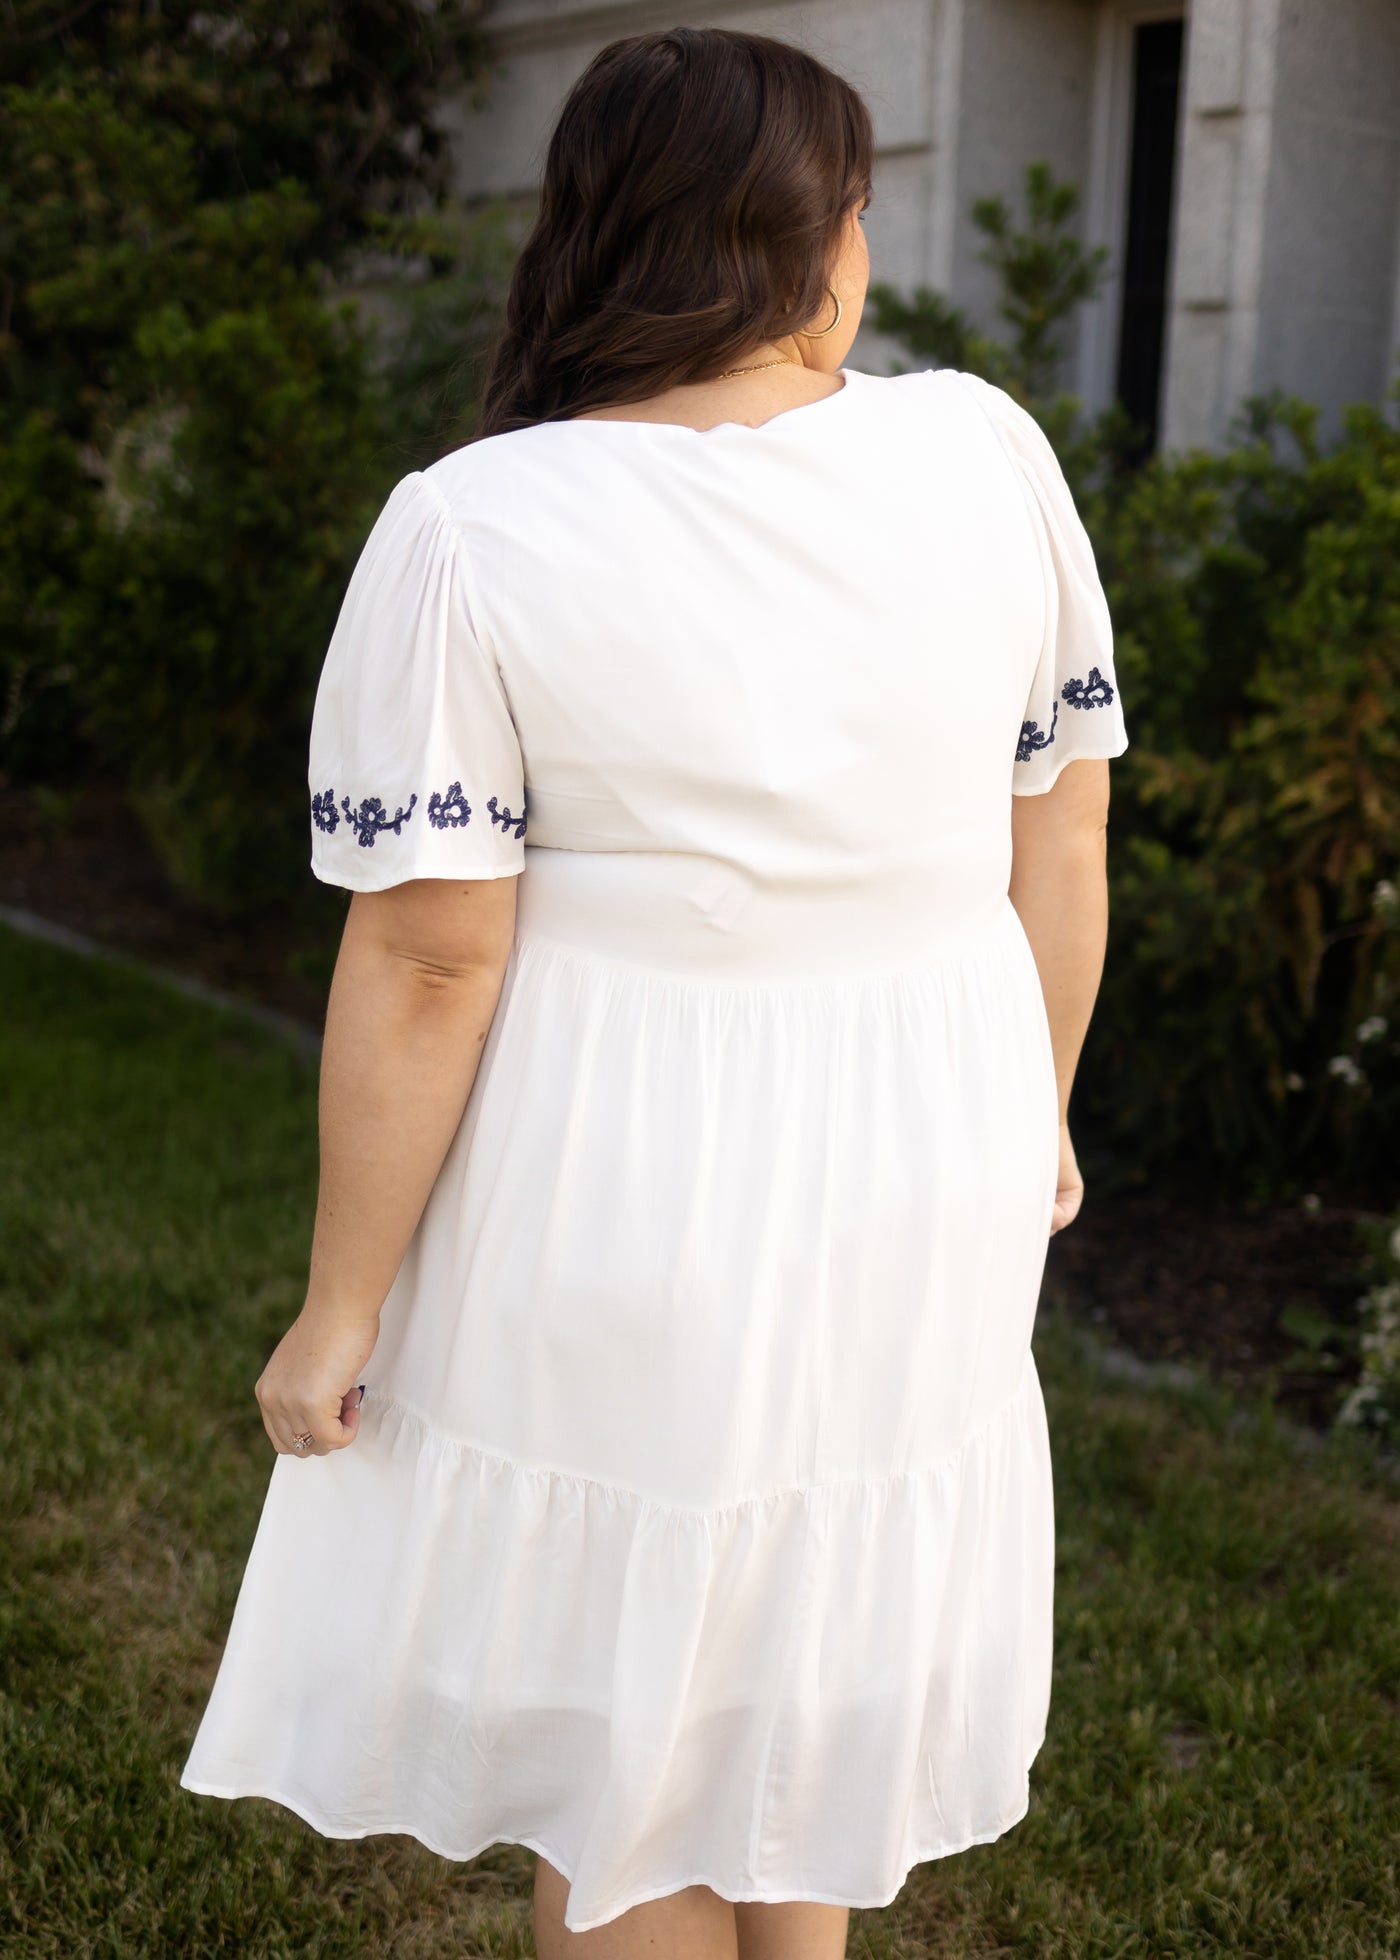 Plus size white dress with blue embroidery